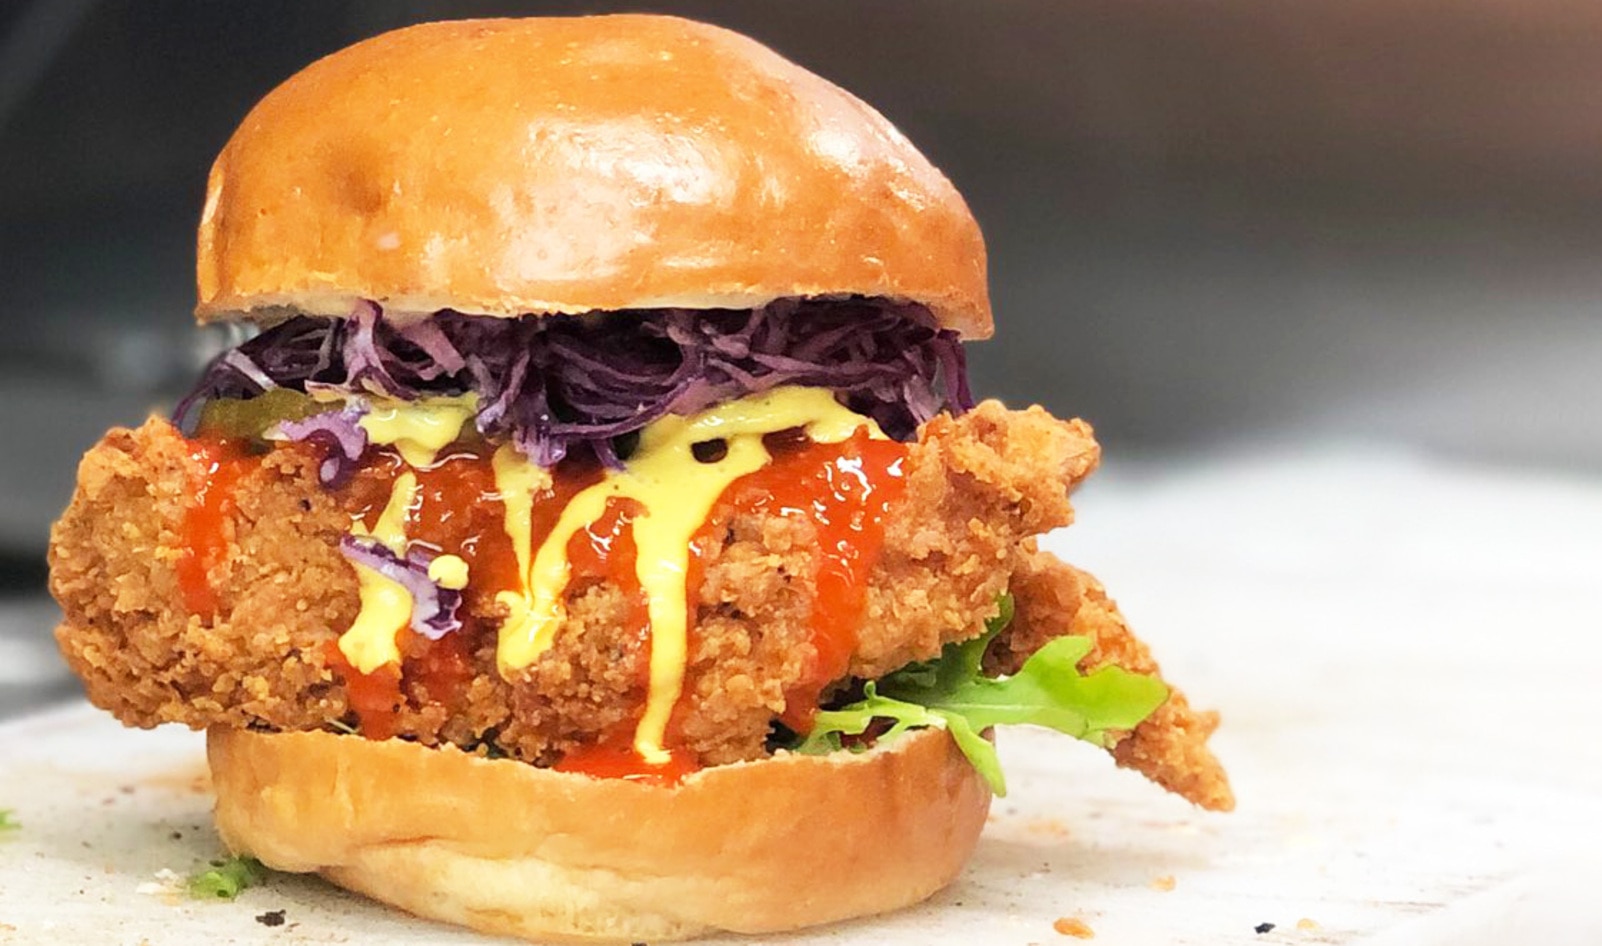 Vegan Food Truck Launches a Pay-What-You-Can Fried Chicken Sandwich